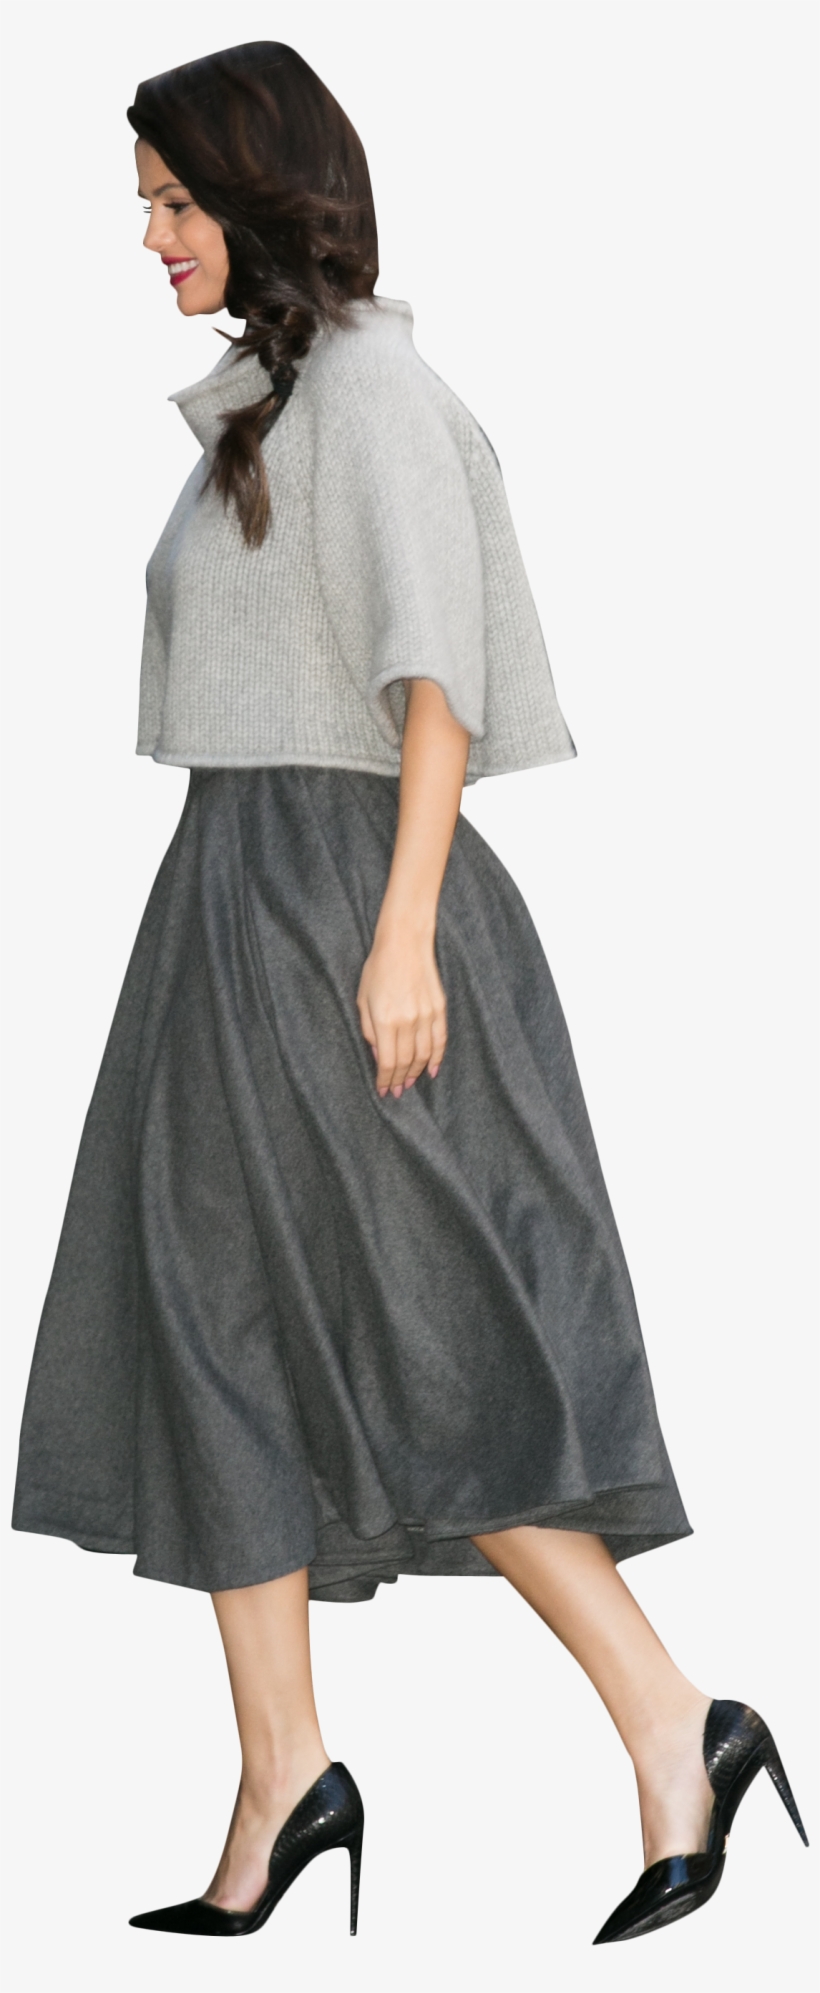 Dress Png, Gray Dress, Selena Gomez, Gray Dress Outfit, - Portable Network Graphics, transparent png #5170426